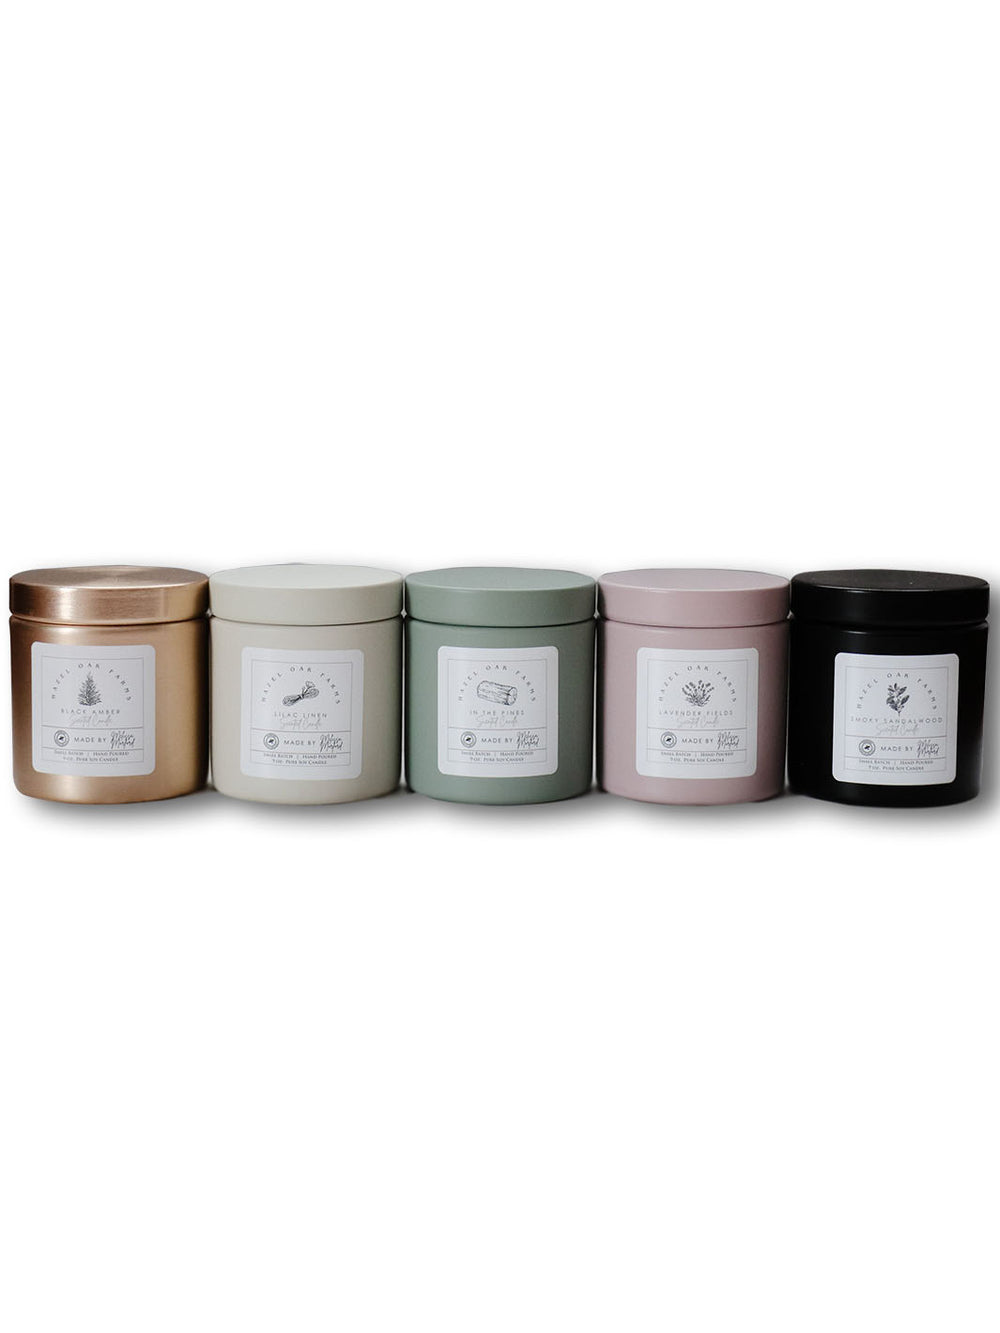 Black Amber - Melissa's Pure Soy Candles (in stock) Earthly Comfort Home Decor 2193-1